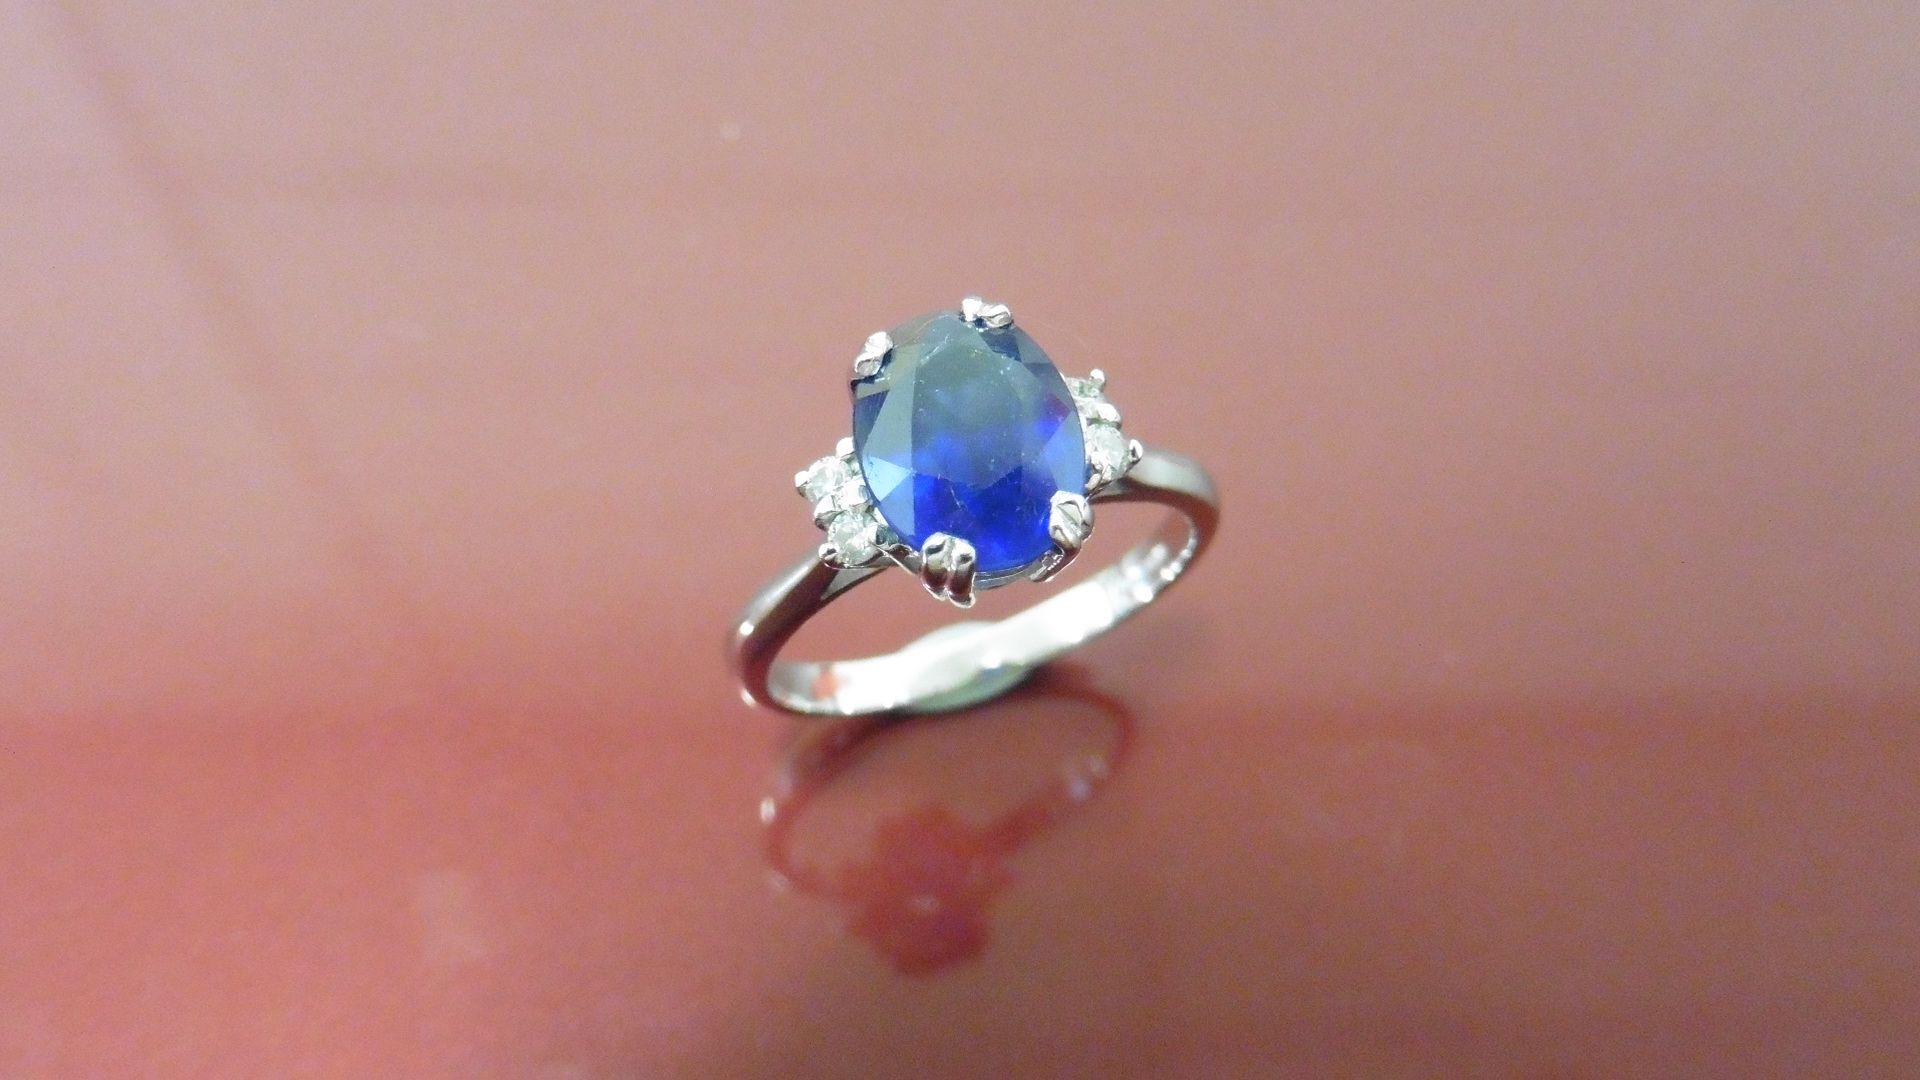 2.40ct Sapphire and diamond dress ring. Oval cut ( glass filled ) sapphire with 2 small brilliant